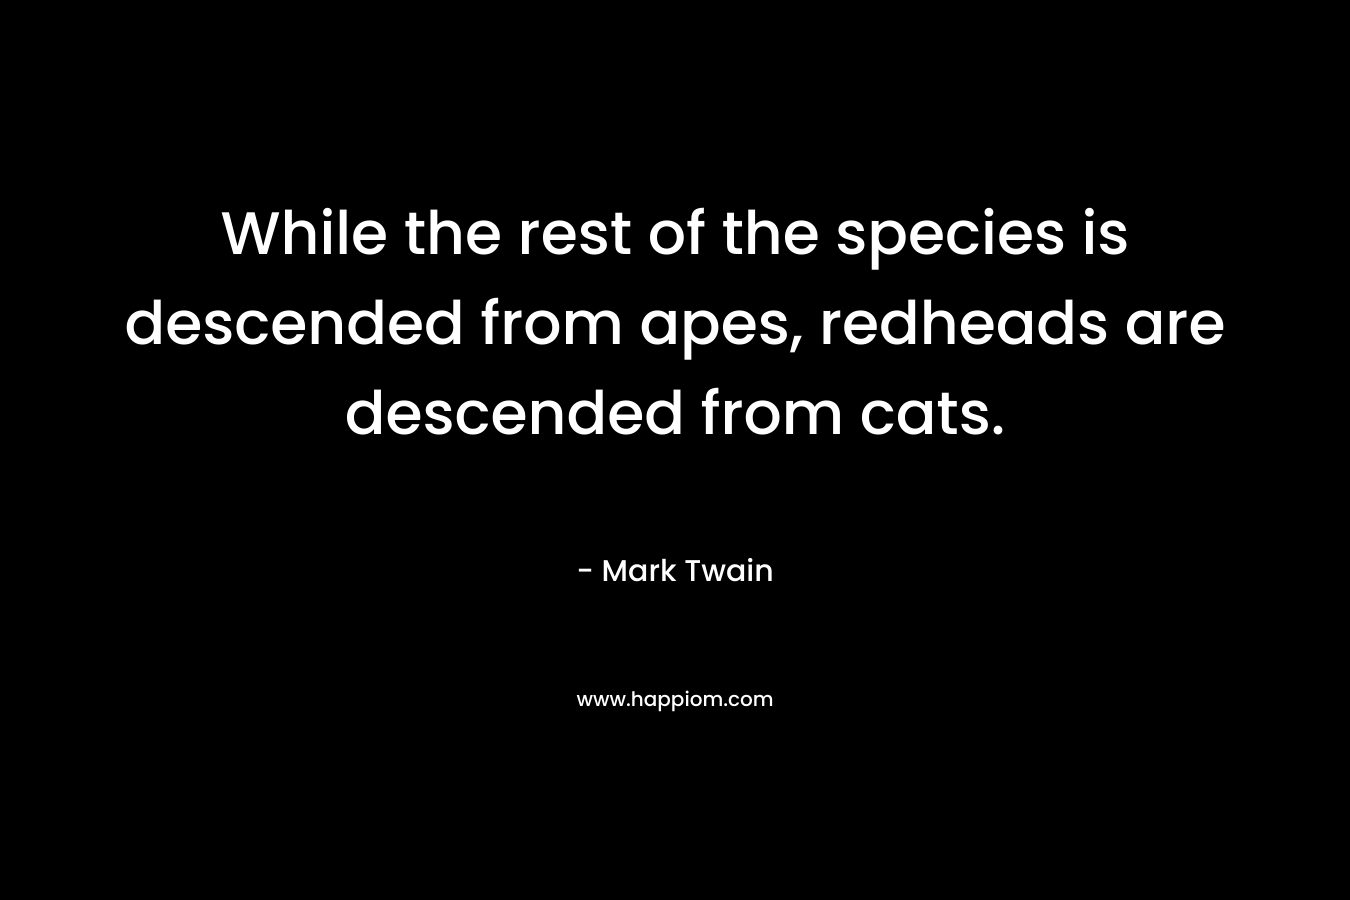 While the rest of the species is descended from apes, redheads are descended from cats. – Mark Twain